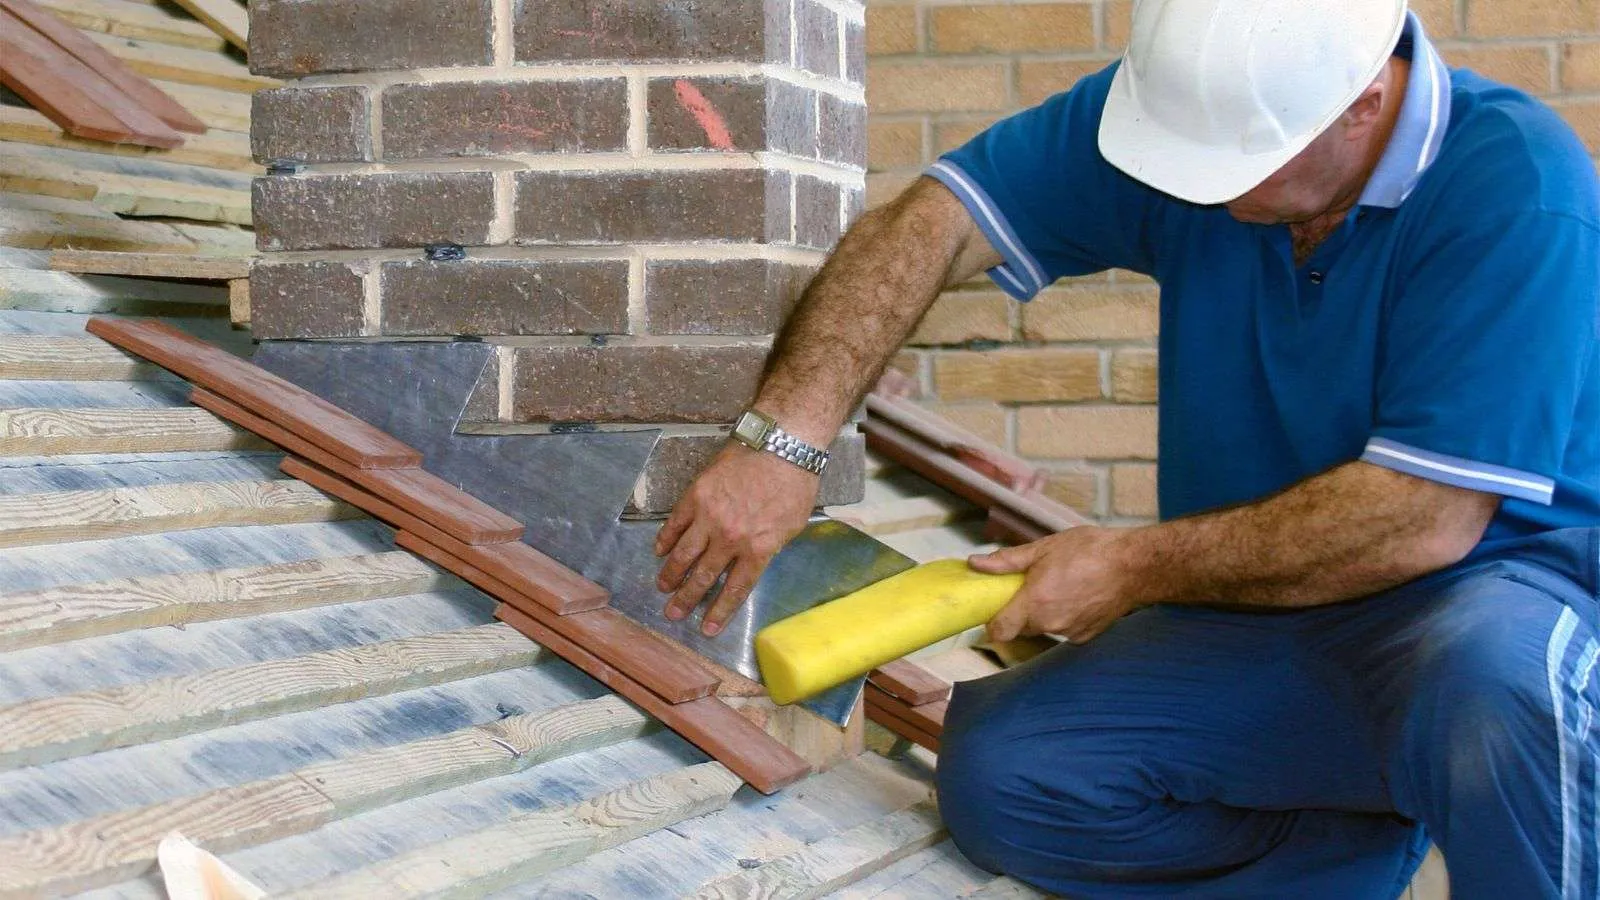 how long does roof flashing last - bighomeprojects.com